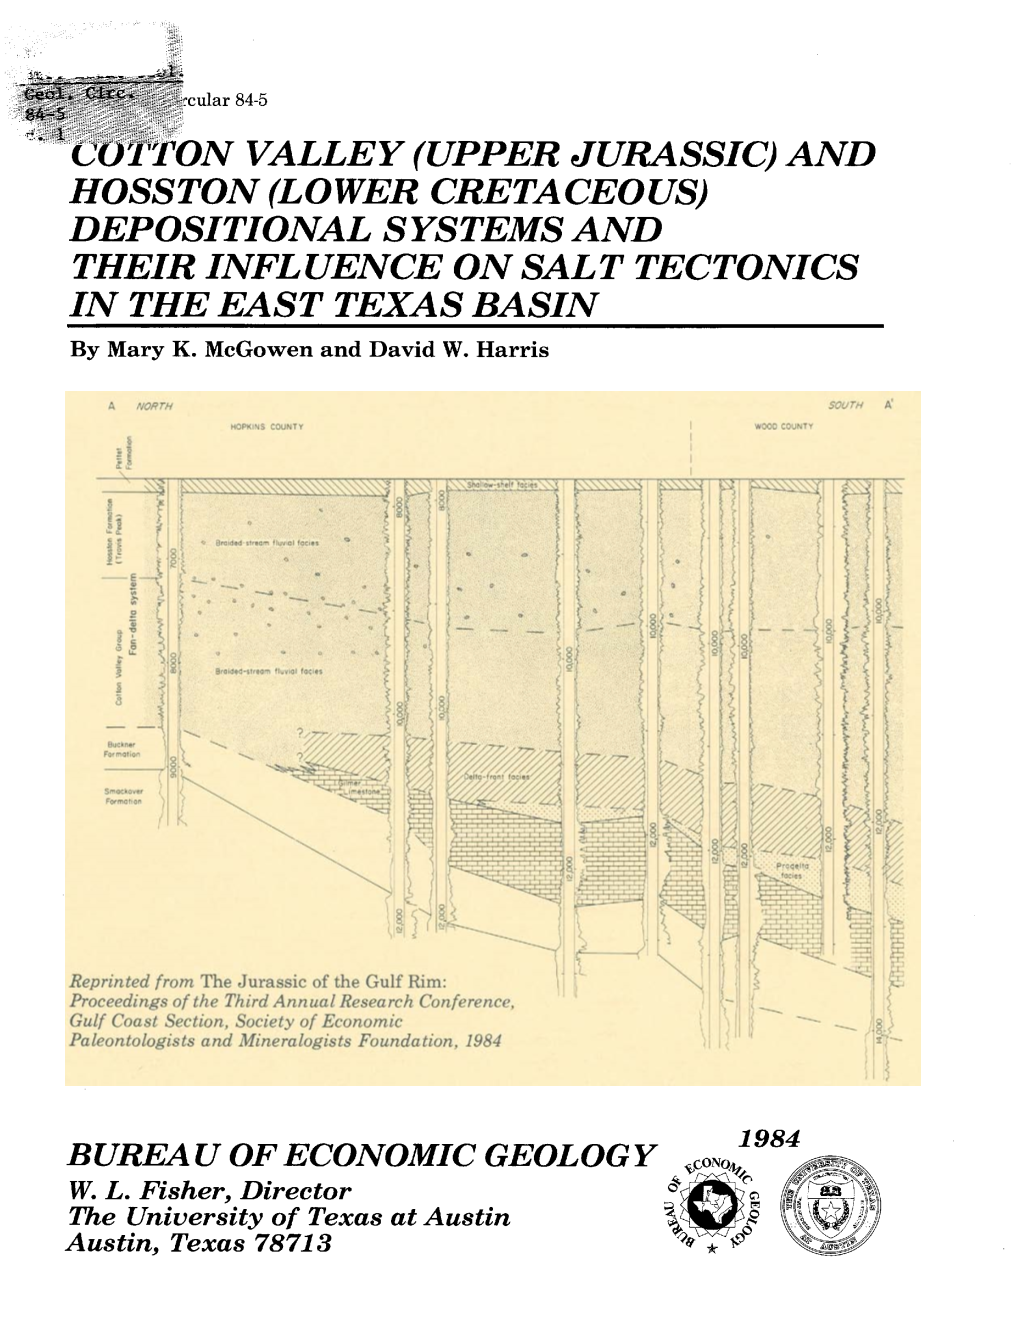 Cotton Valley (Upper Jurassic)And Hosston(Lower Cretaceous) Depositional Systemsand Their Influence Onsalt Tectonics Intheeast Texasbasin by Mary K